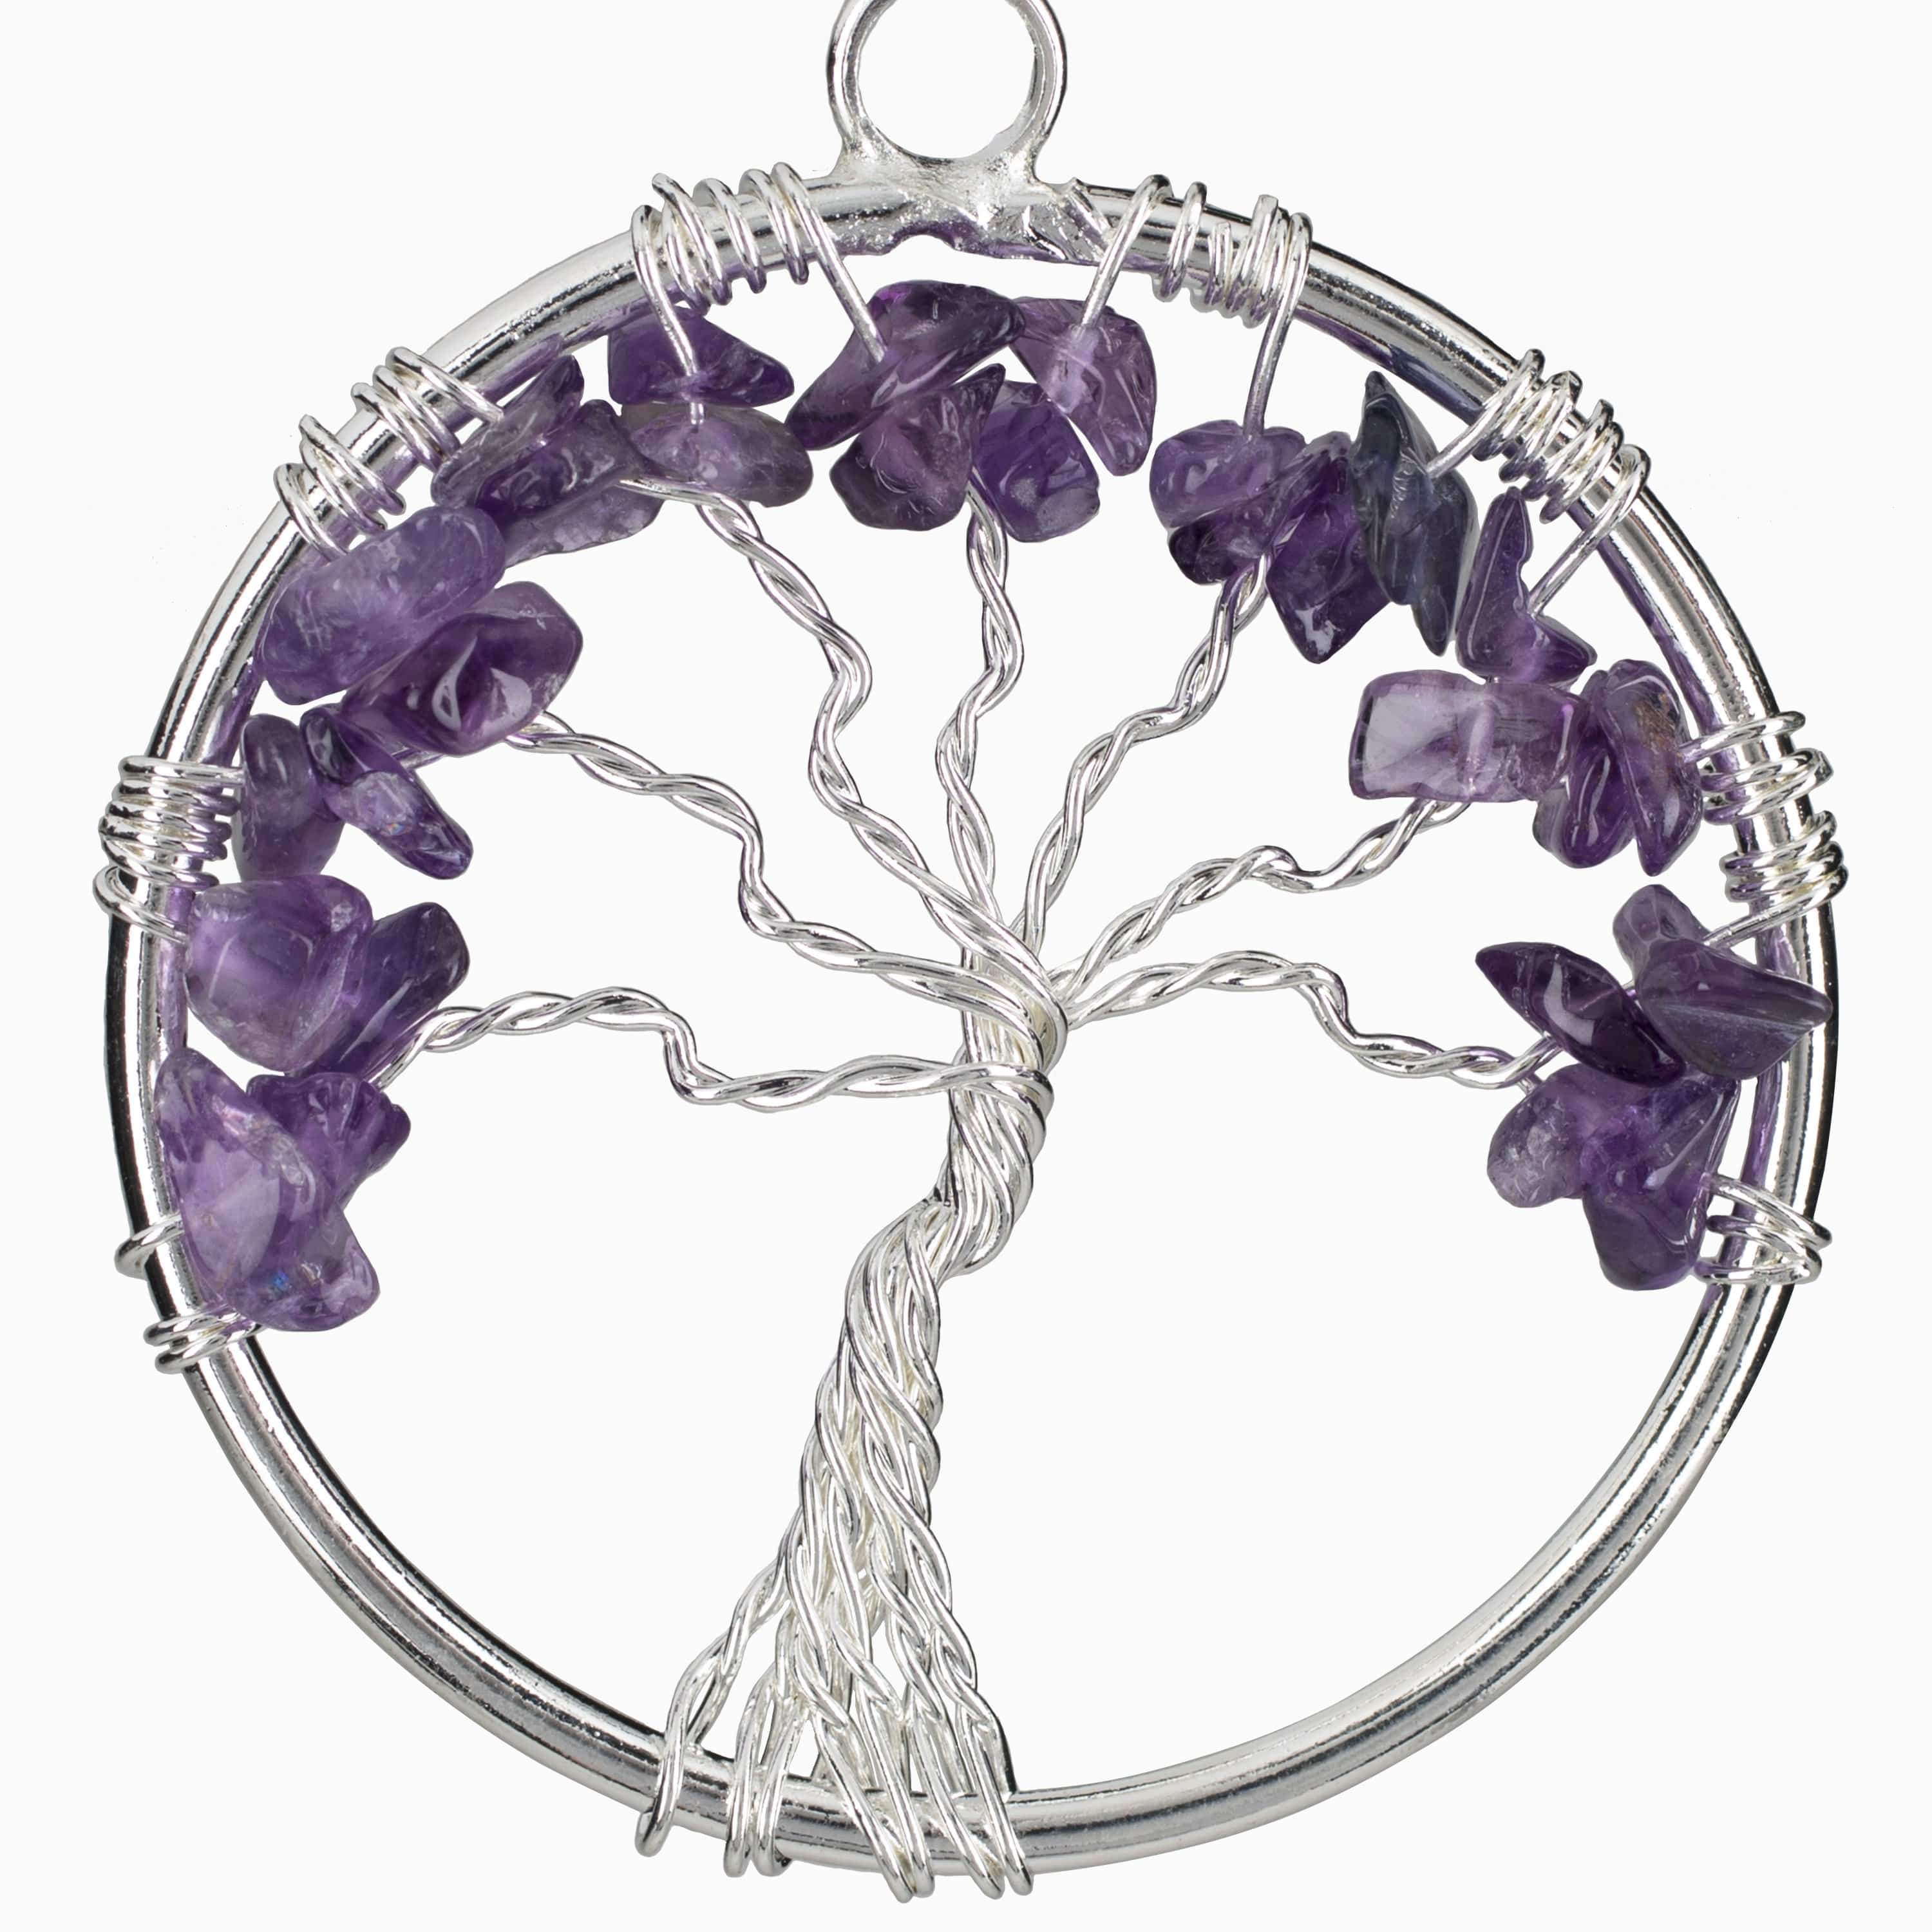 Kalifano Crystal Jewelry Amethyst Chakra Gemstone Tree of Life Necklace & Stainless Steel Chain CJCN20-AM